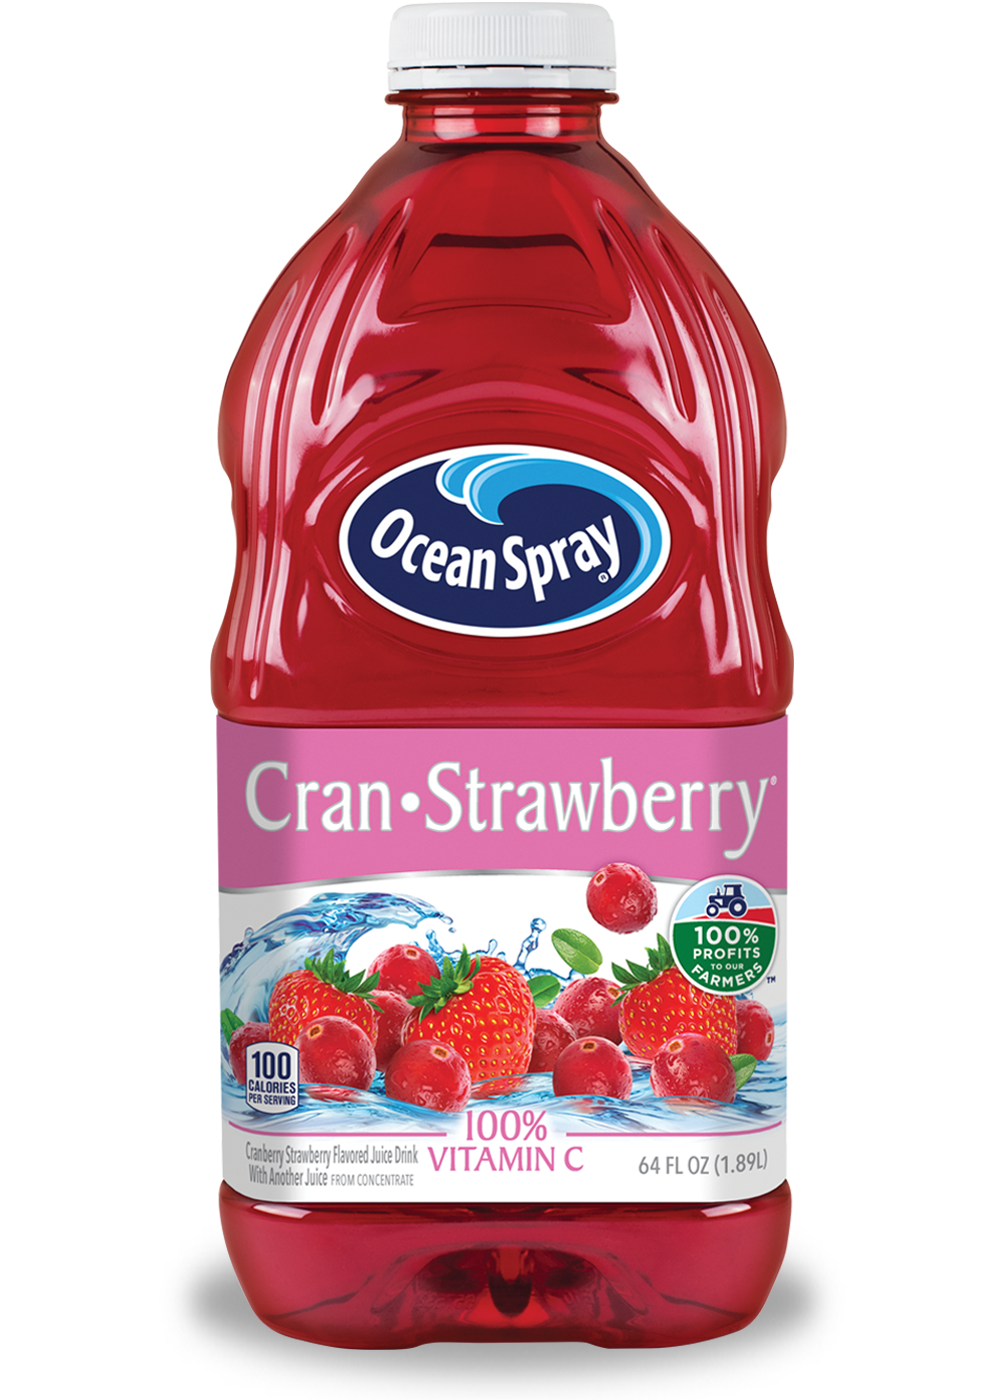 https://www.oceanspray.sx/-/media/Project/OS/Brand-Sites/OceanSpray/Master/Intl-Master/Products/Detail/Cran-Strawberry-Cranberry-Strawberry-Juice-Drink.ashx